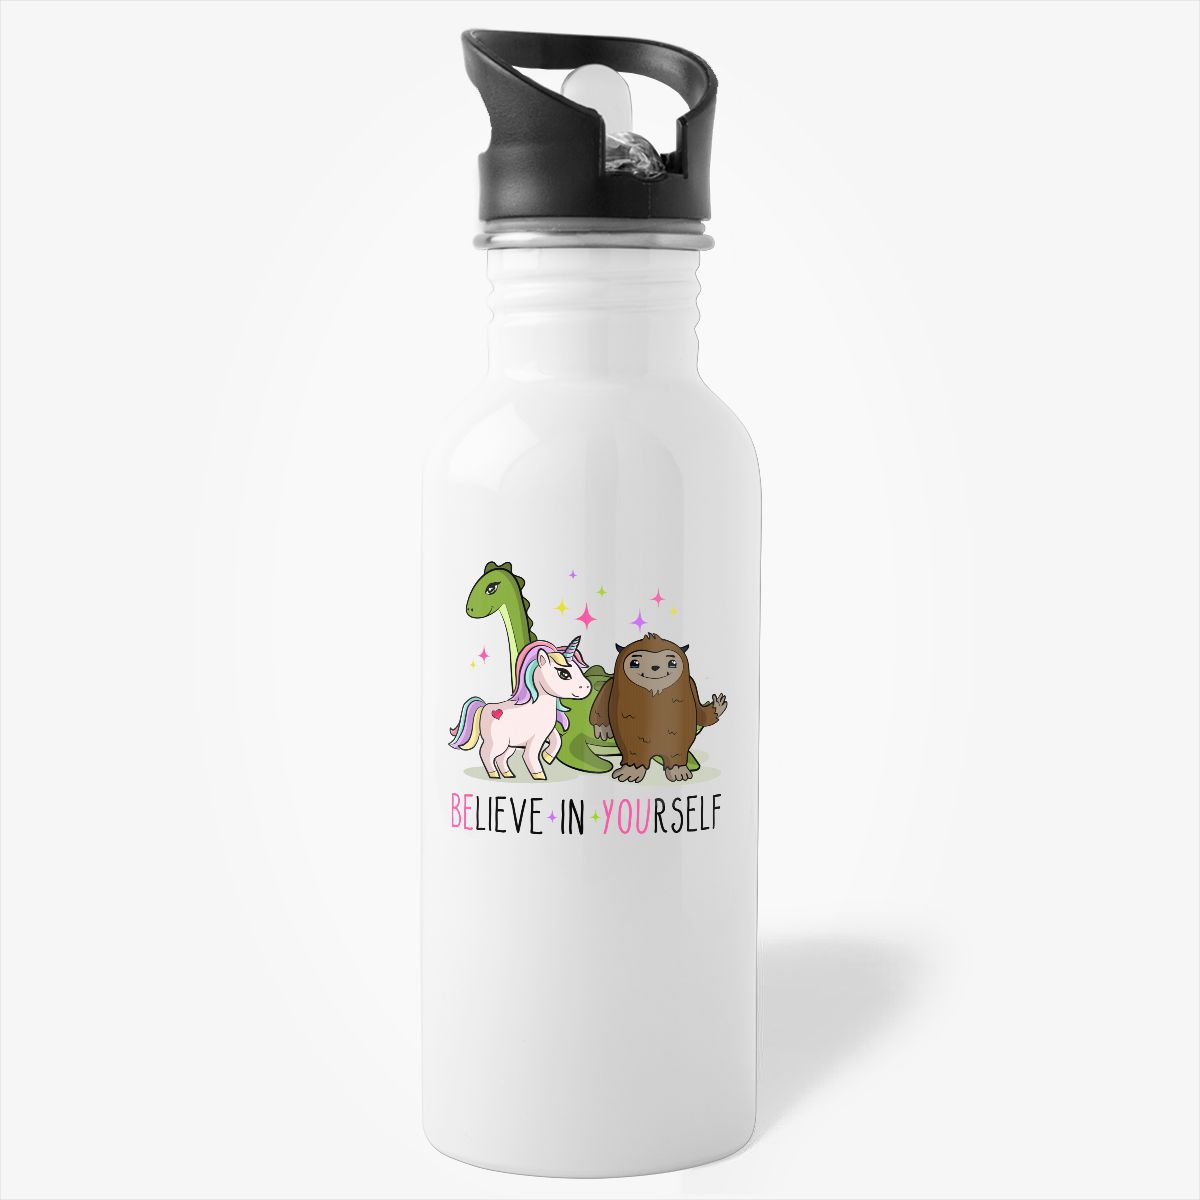 Believe In Yourself, funny inspirational water bottle, cute gift for her,  graduation gift, motivational, for daughter, for niece